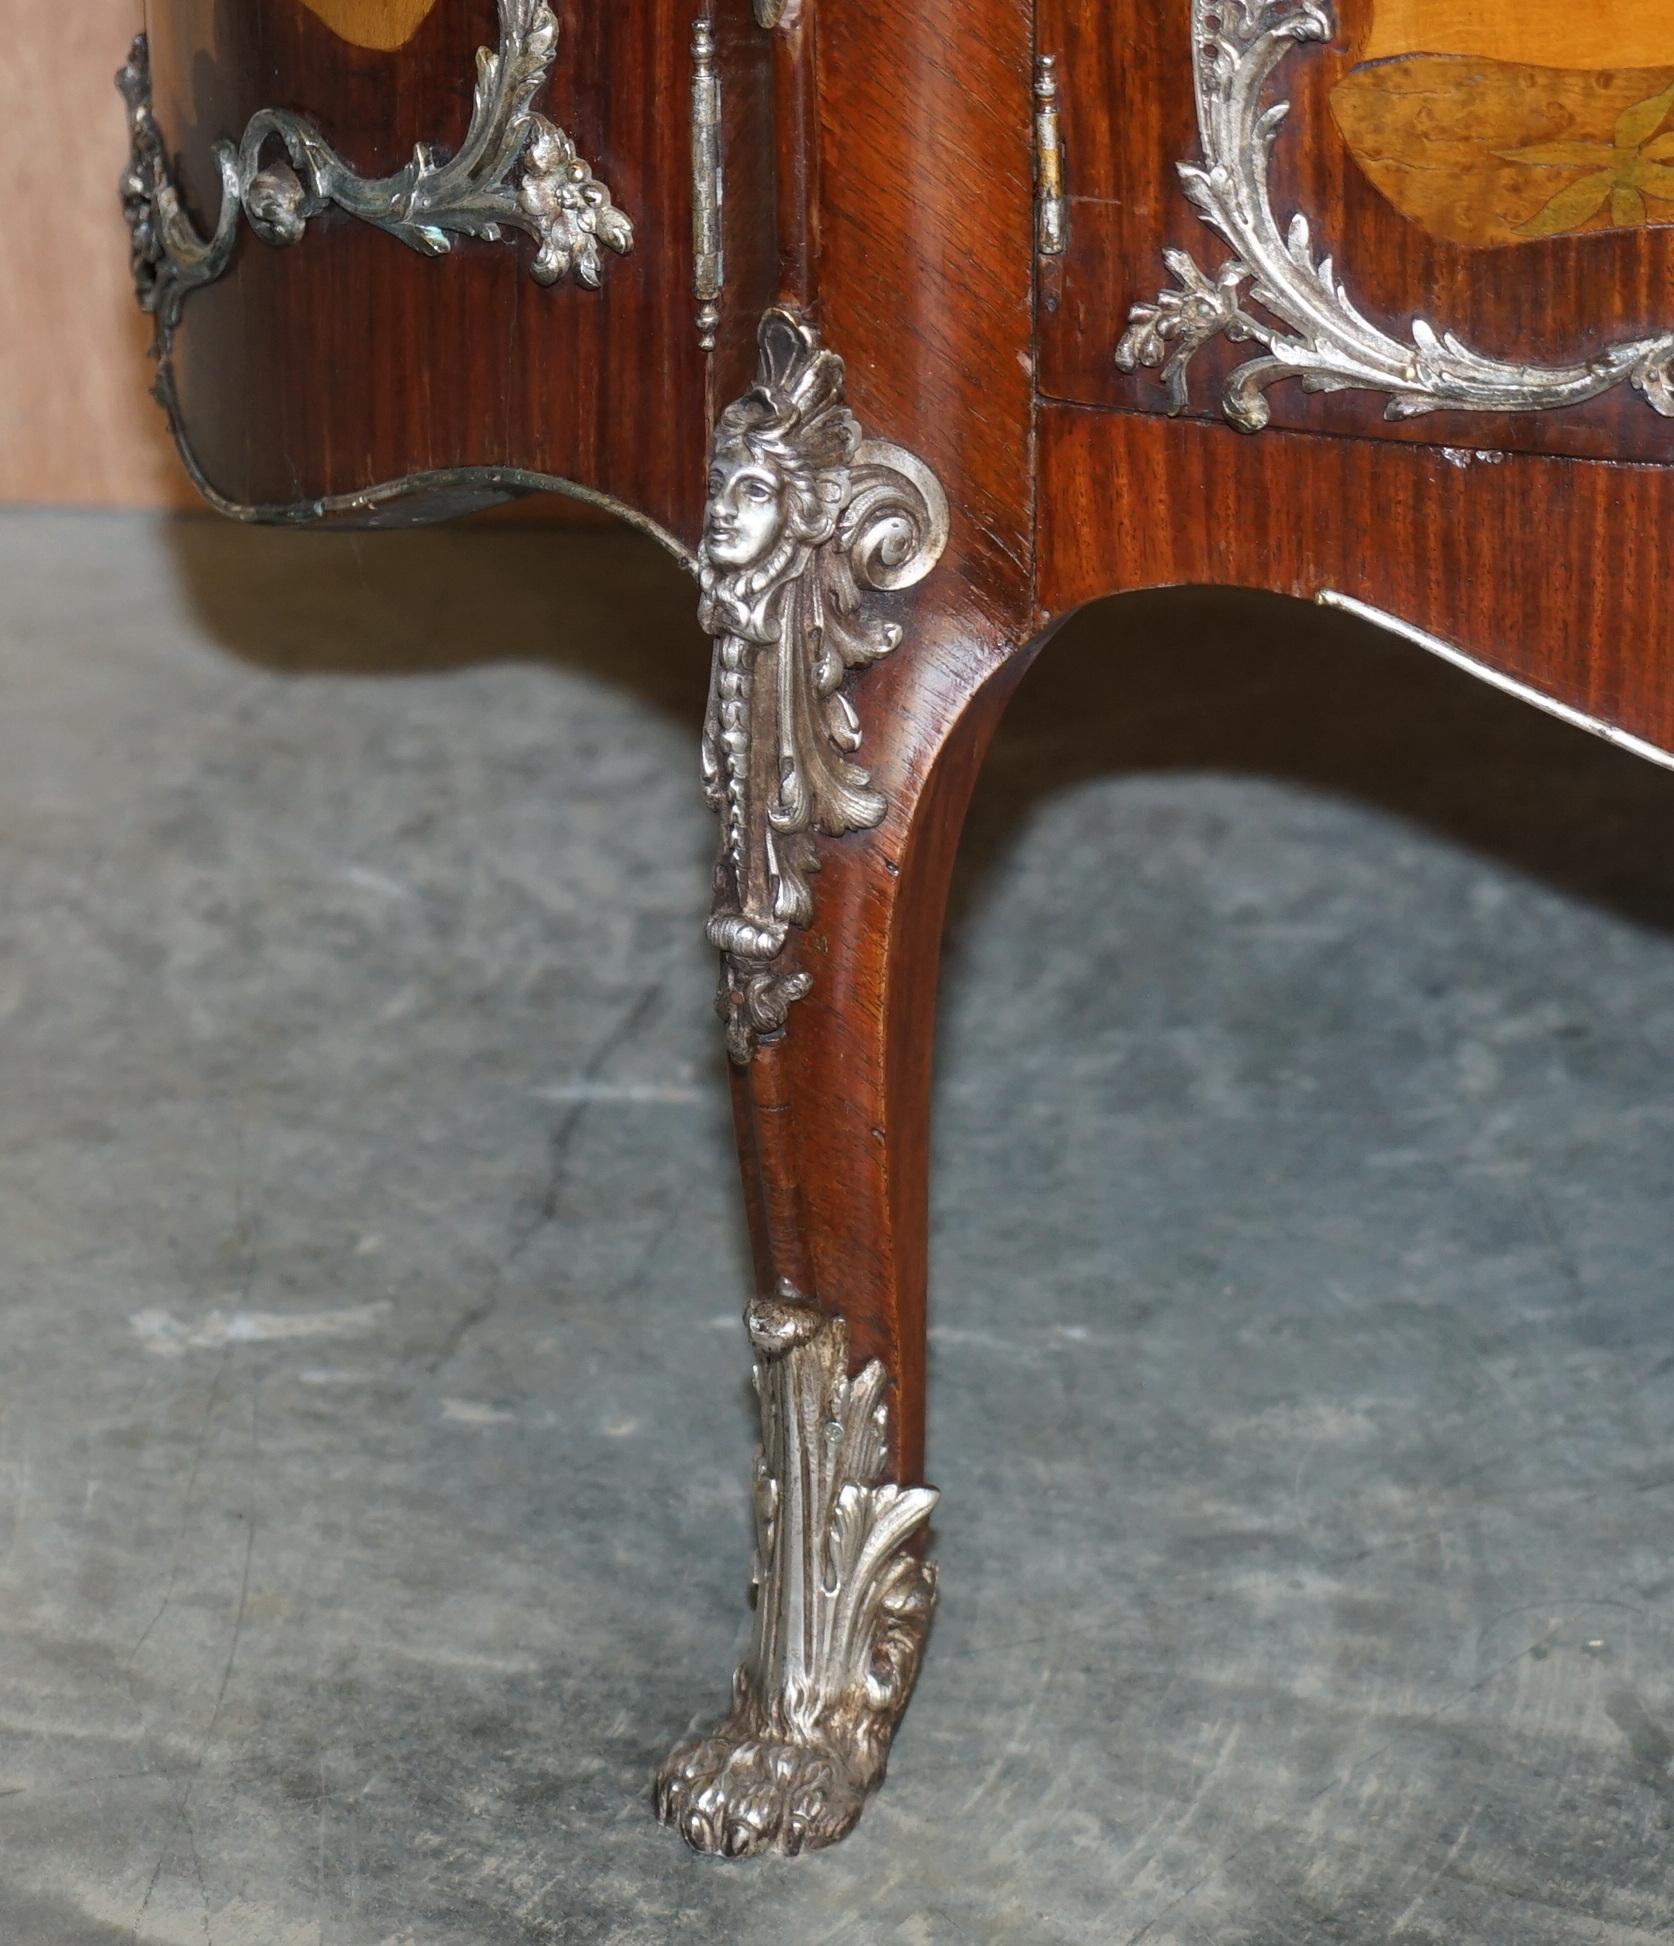 Rare & Collectable Germain Landrin circa 1750 French Marble Kingwood Sideboard For Sale 1